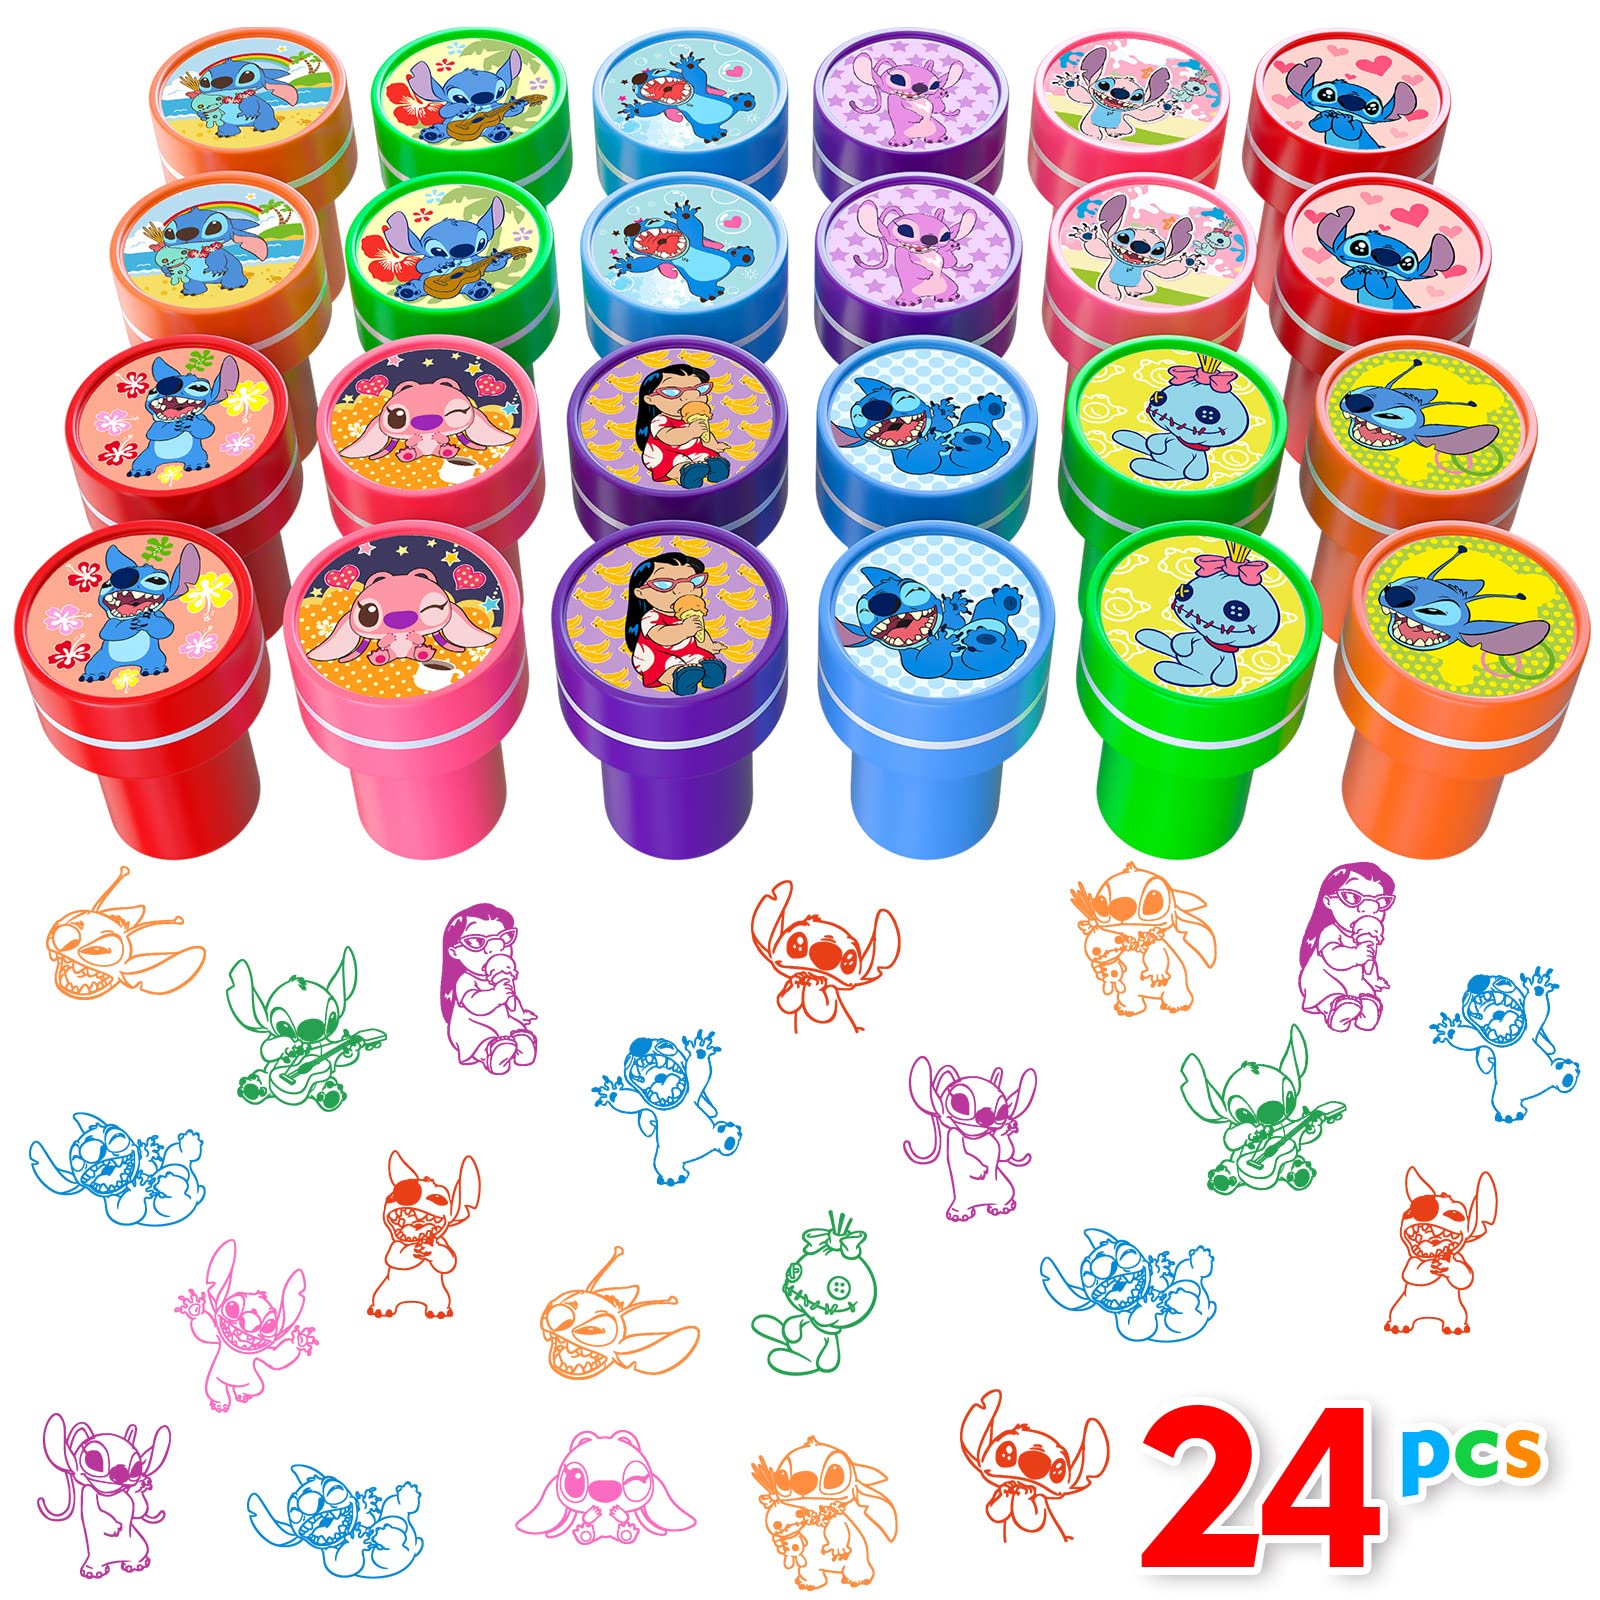 AFZMON Lilo and Stitch Party Stamps for Kids, 24Pcs Assorted Self